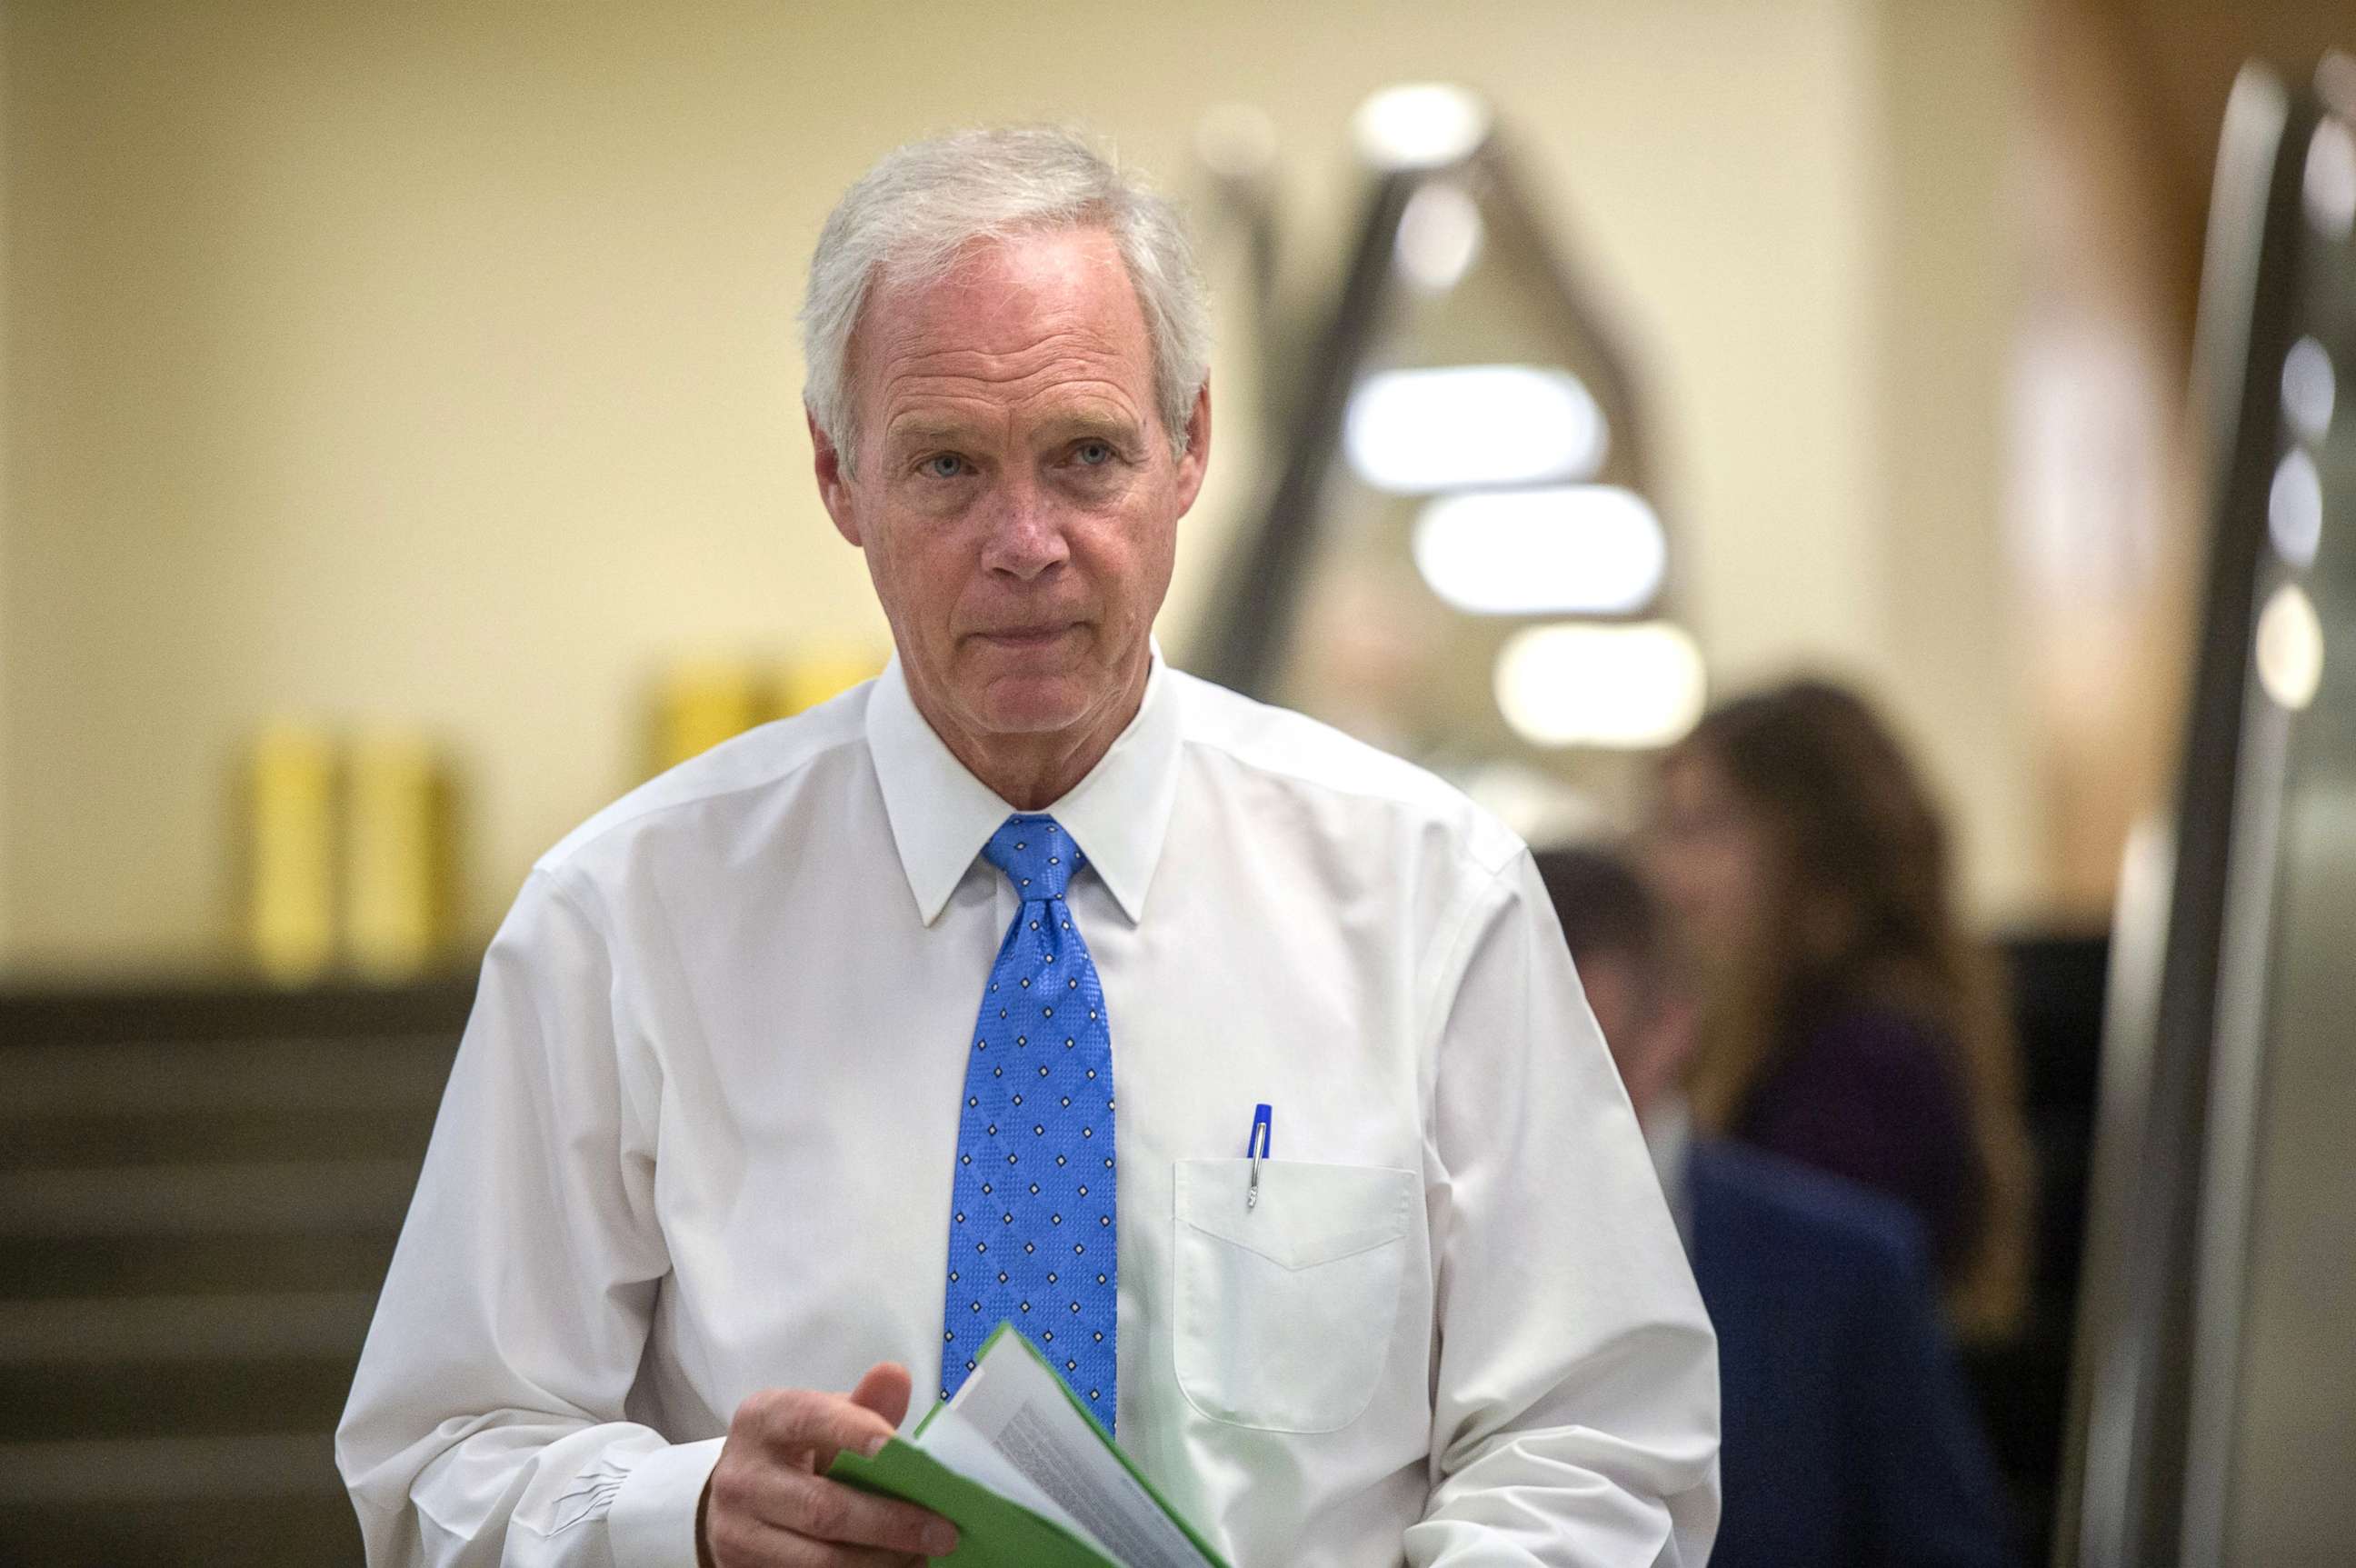 PHOTO: Sen. Ron Johnson leaves the Senate chambers after voting on infrastructure bill amendments at the U.S. Capitol in Washington, D.C., Aug. 10, 2021.
